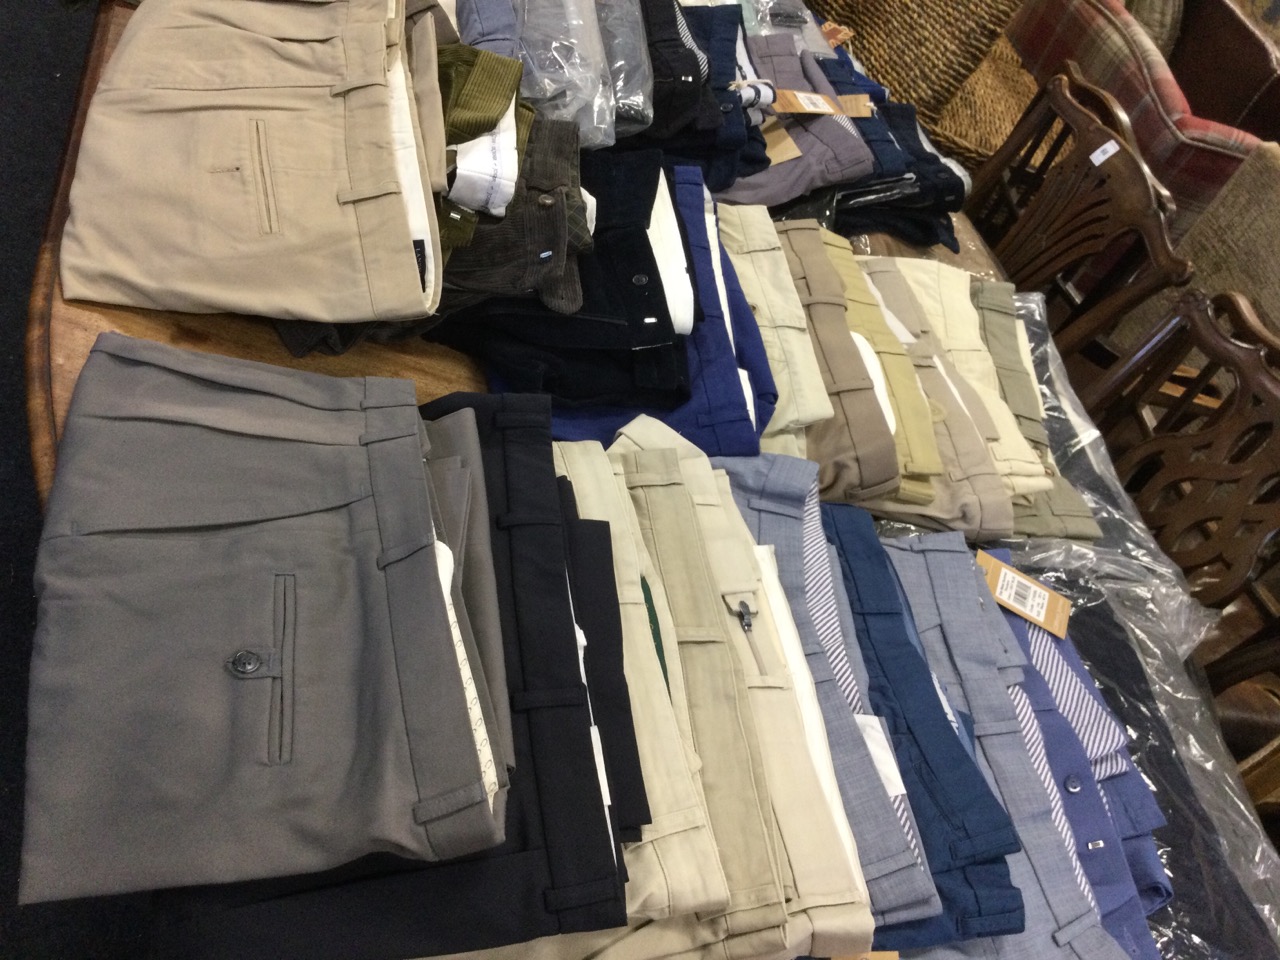 40 pairs of gents trousers including Orvis, Lands End, Yves Saint Laurent, moleskins, corduroy, - Image 3 of 3